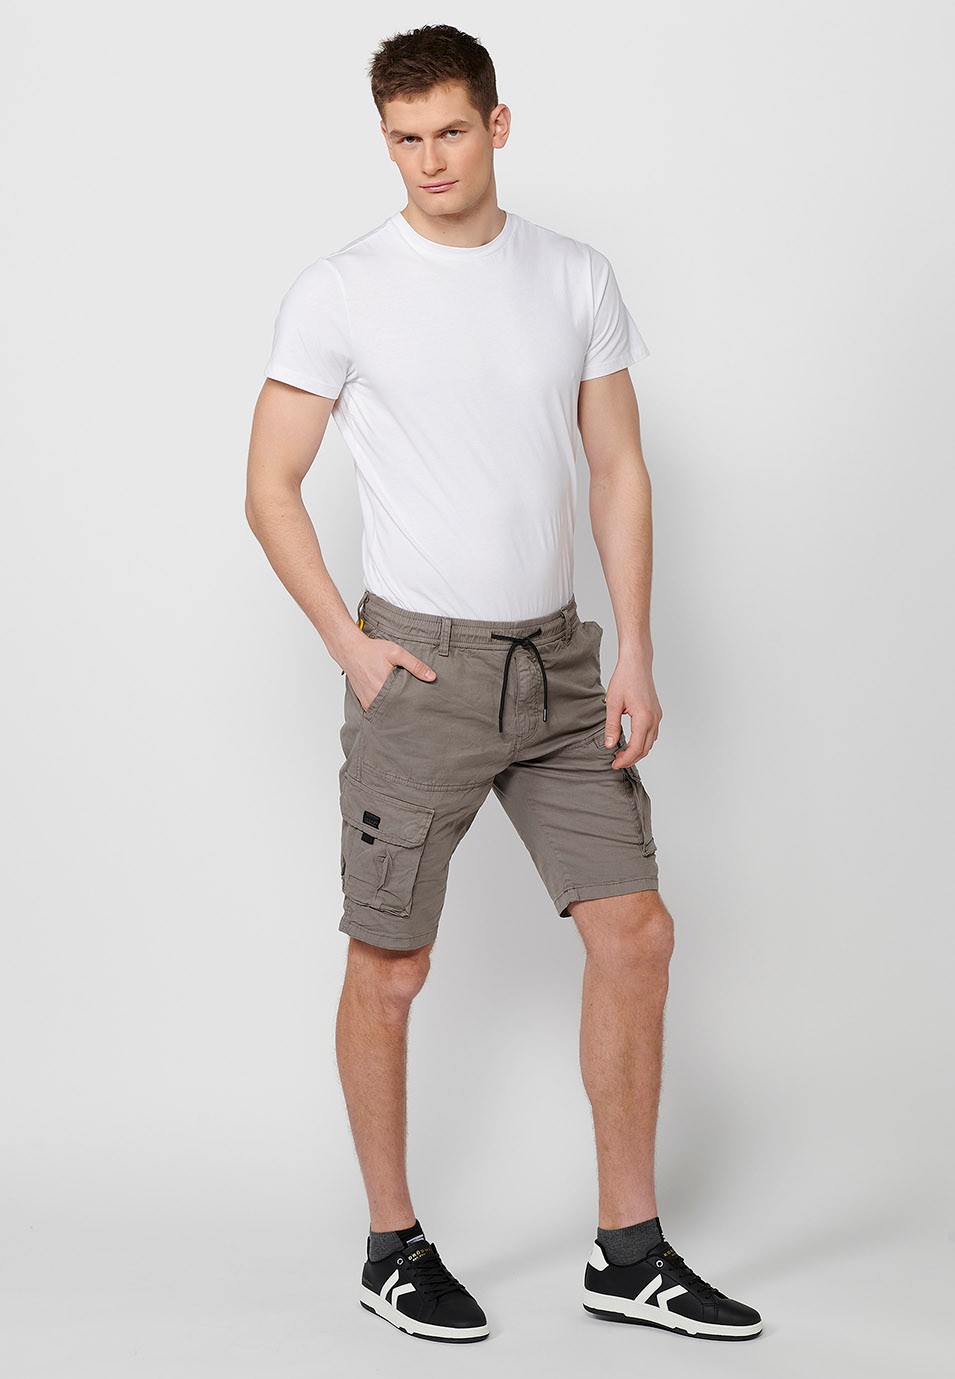 Cargo shorts with side pockets with flap and front closure with zipper and button Taupe Color for Men